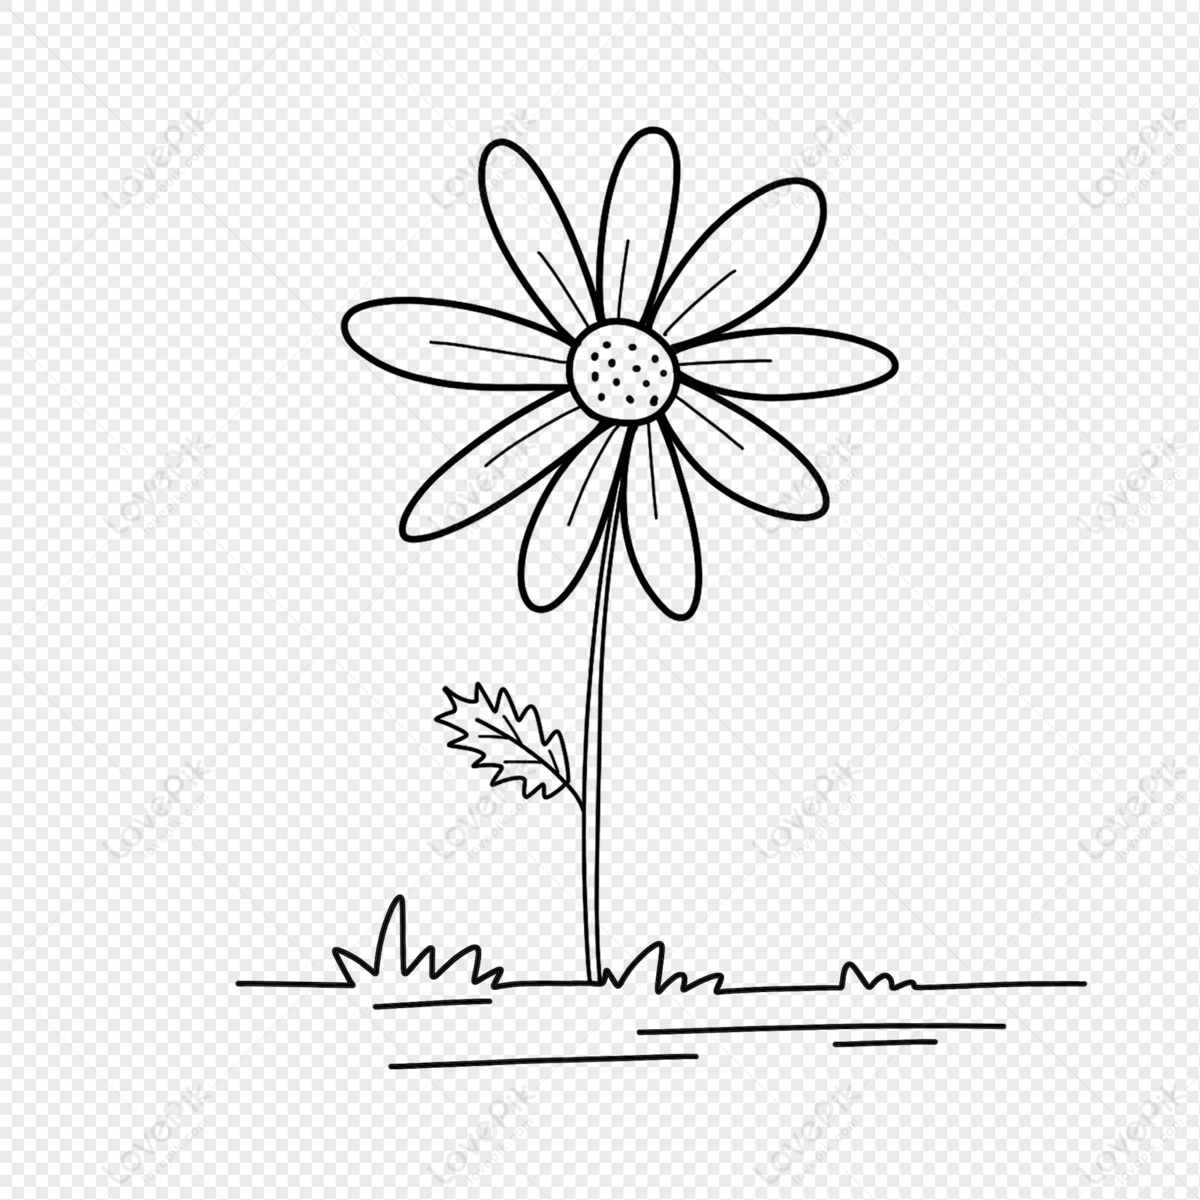 Flower Stick Figure PNG Free Download And Clipart Image For Free ...